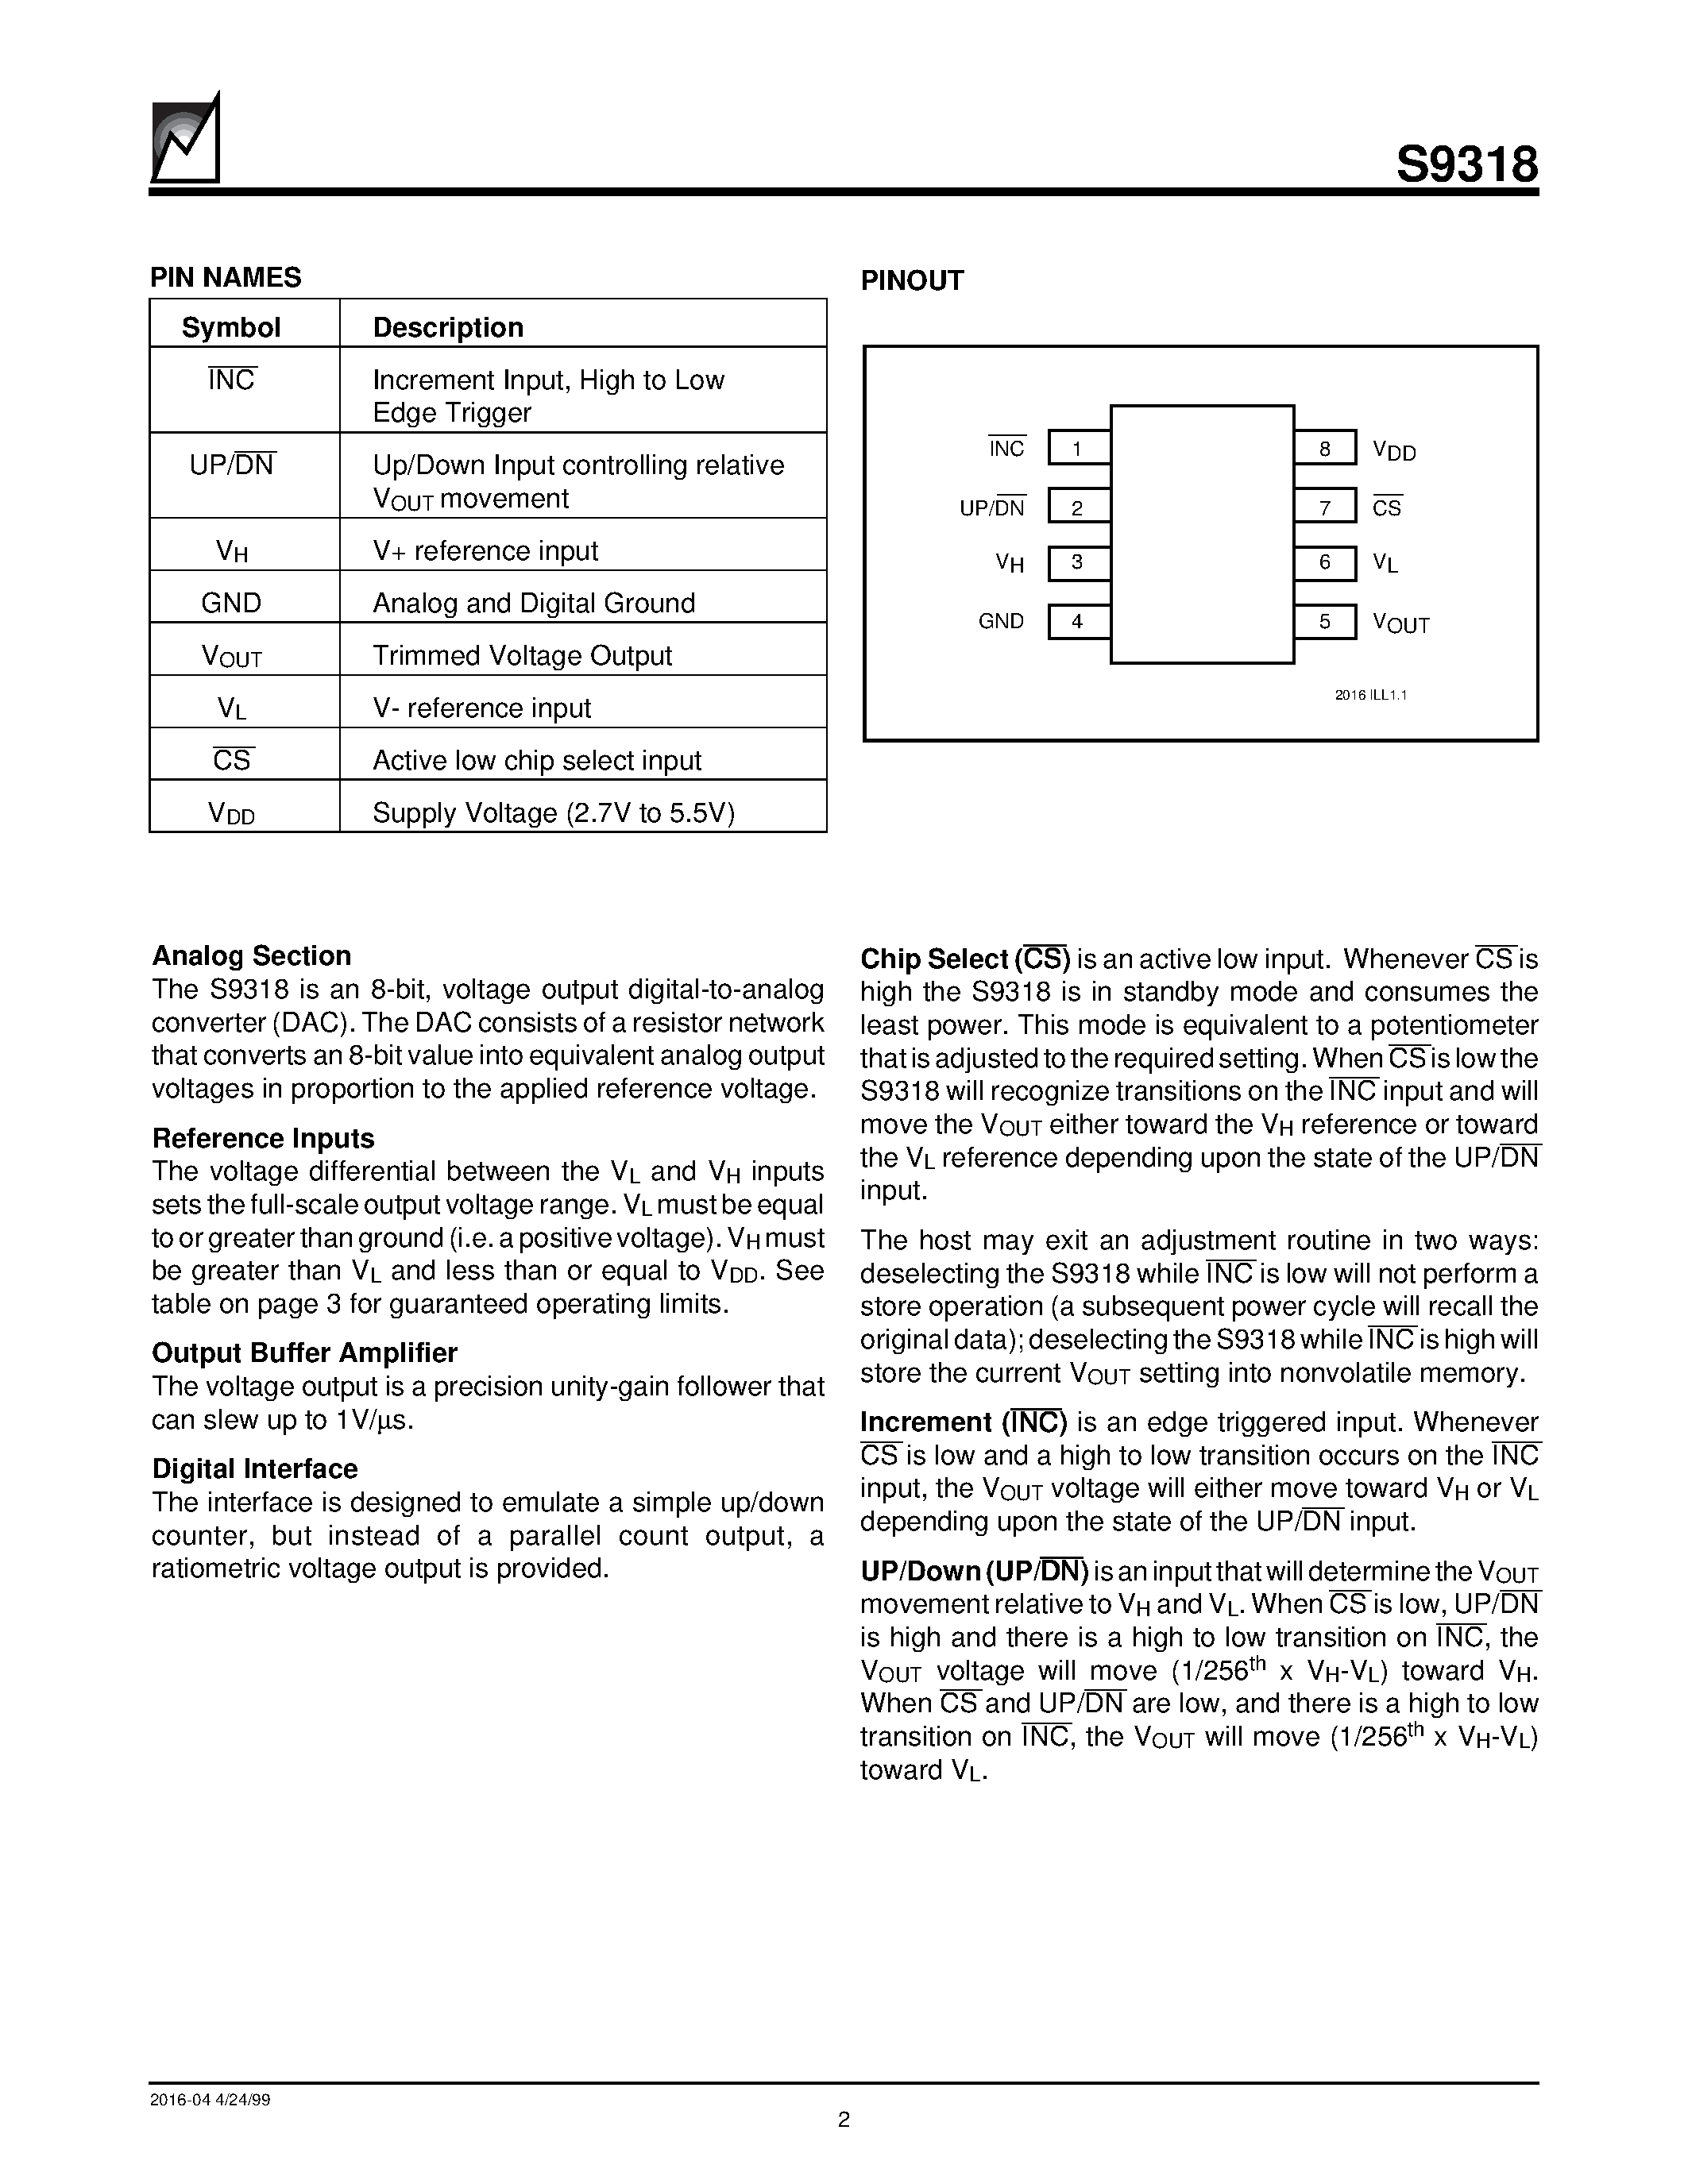 Datasheet S9318 - Nonvolatile DACPOT Electronic Potentiometer With Up/Down Counter Interface page 2